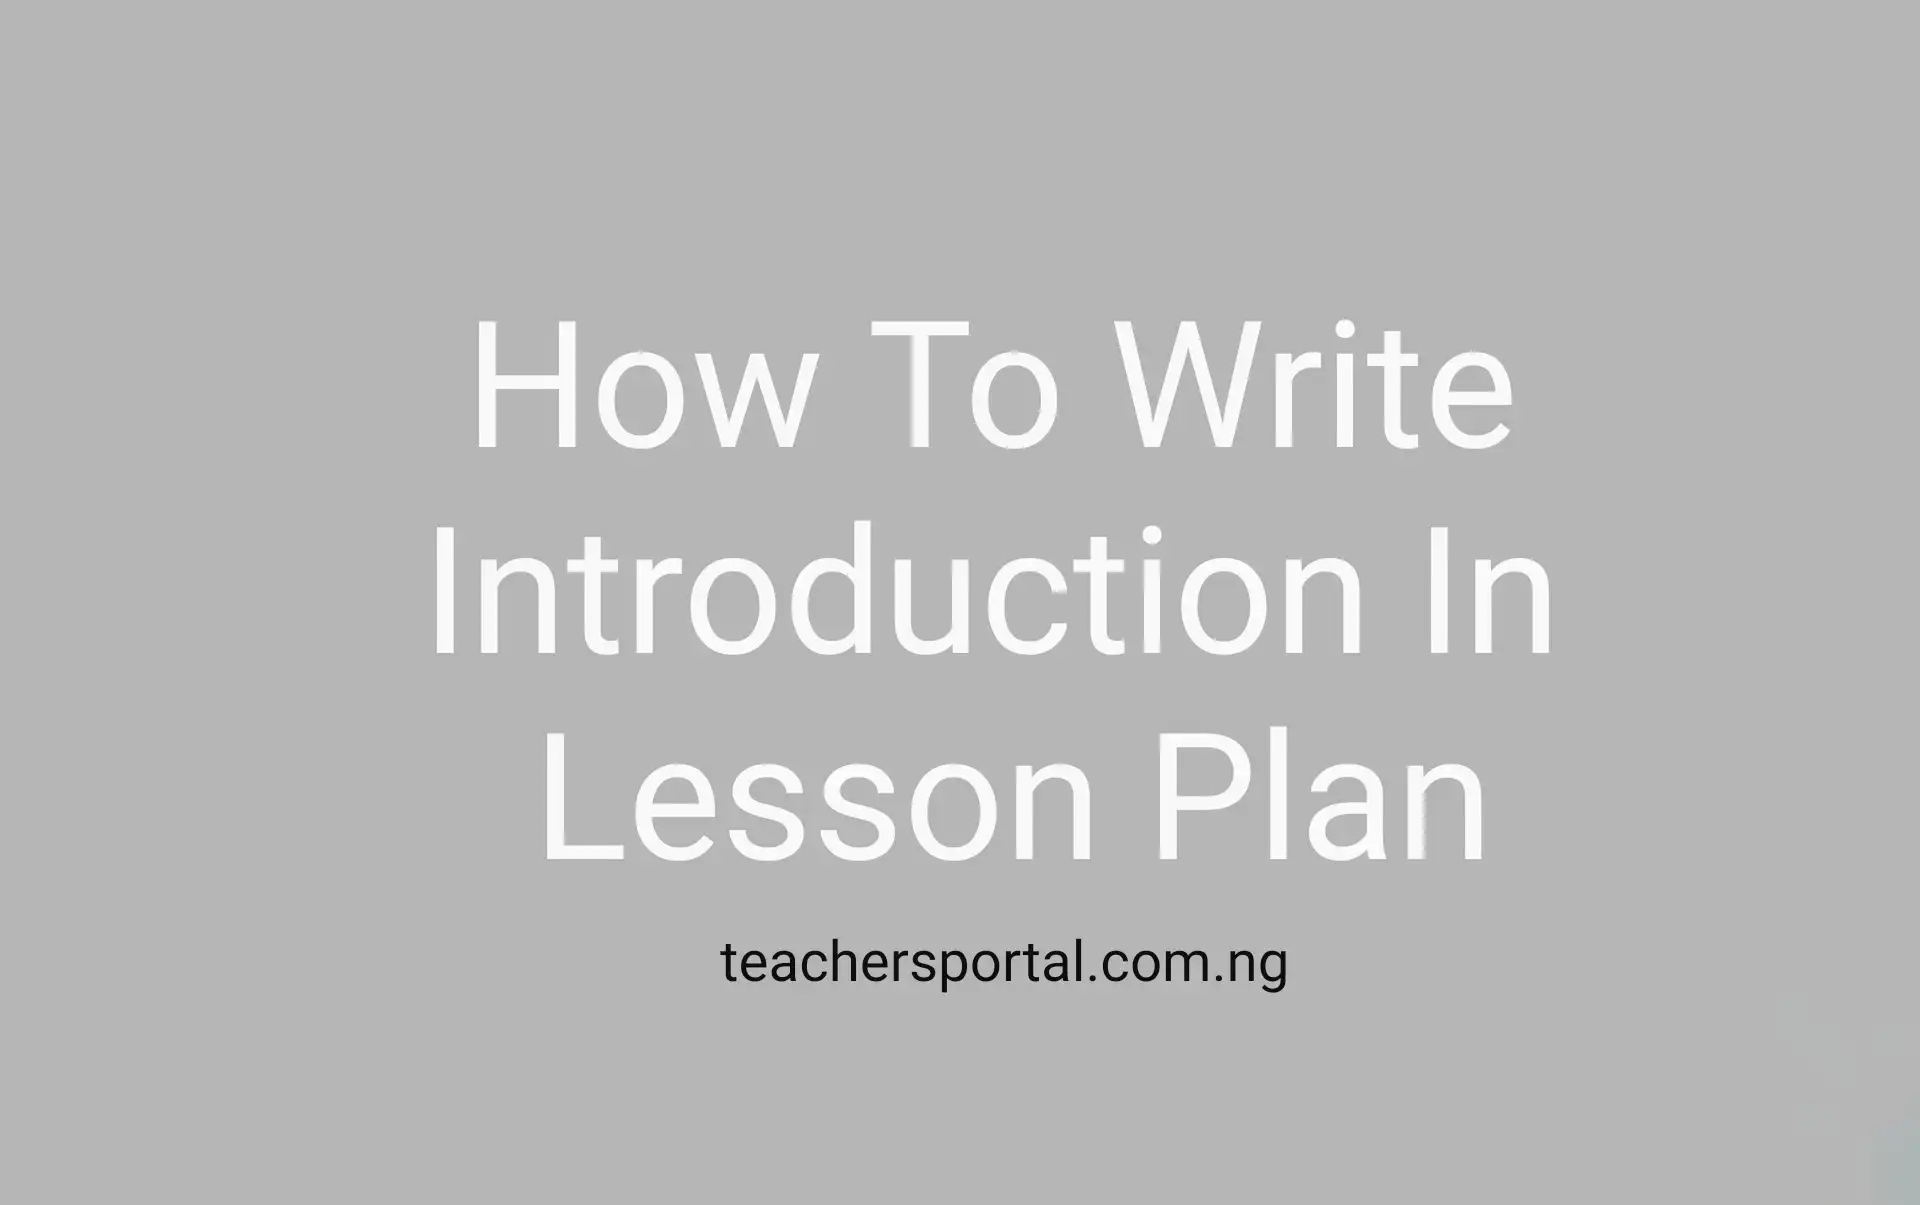 How To Write Introduction In Lesson Plan